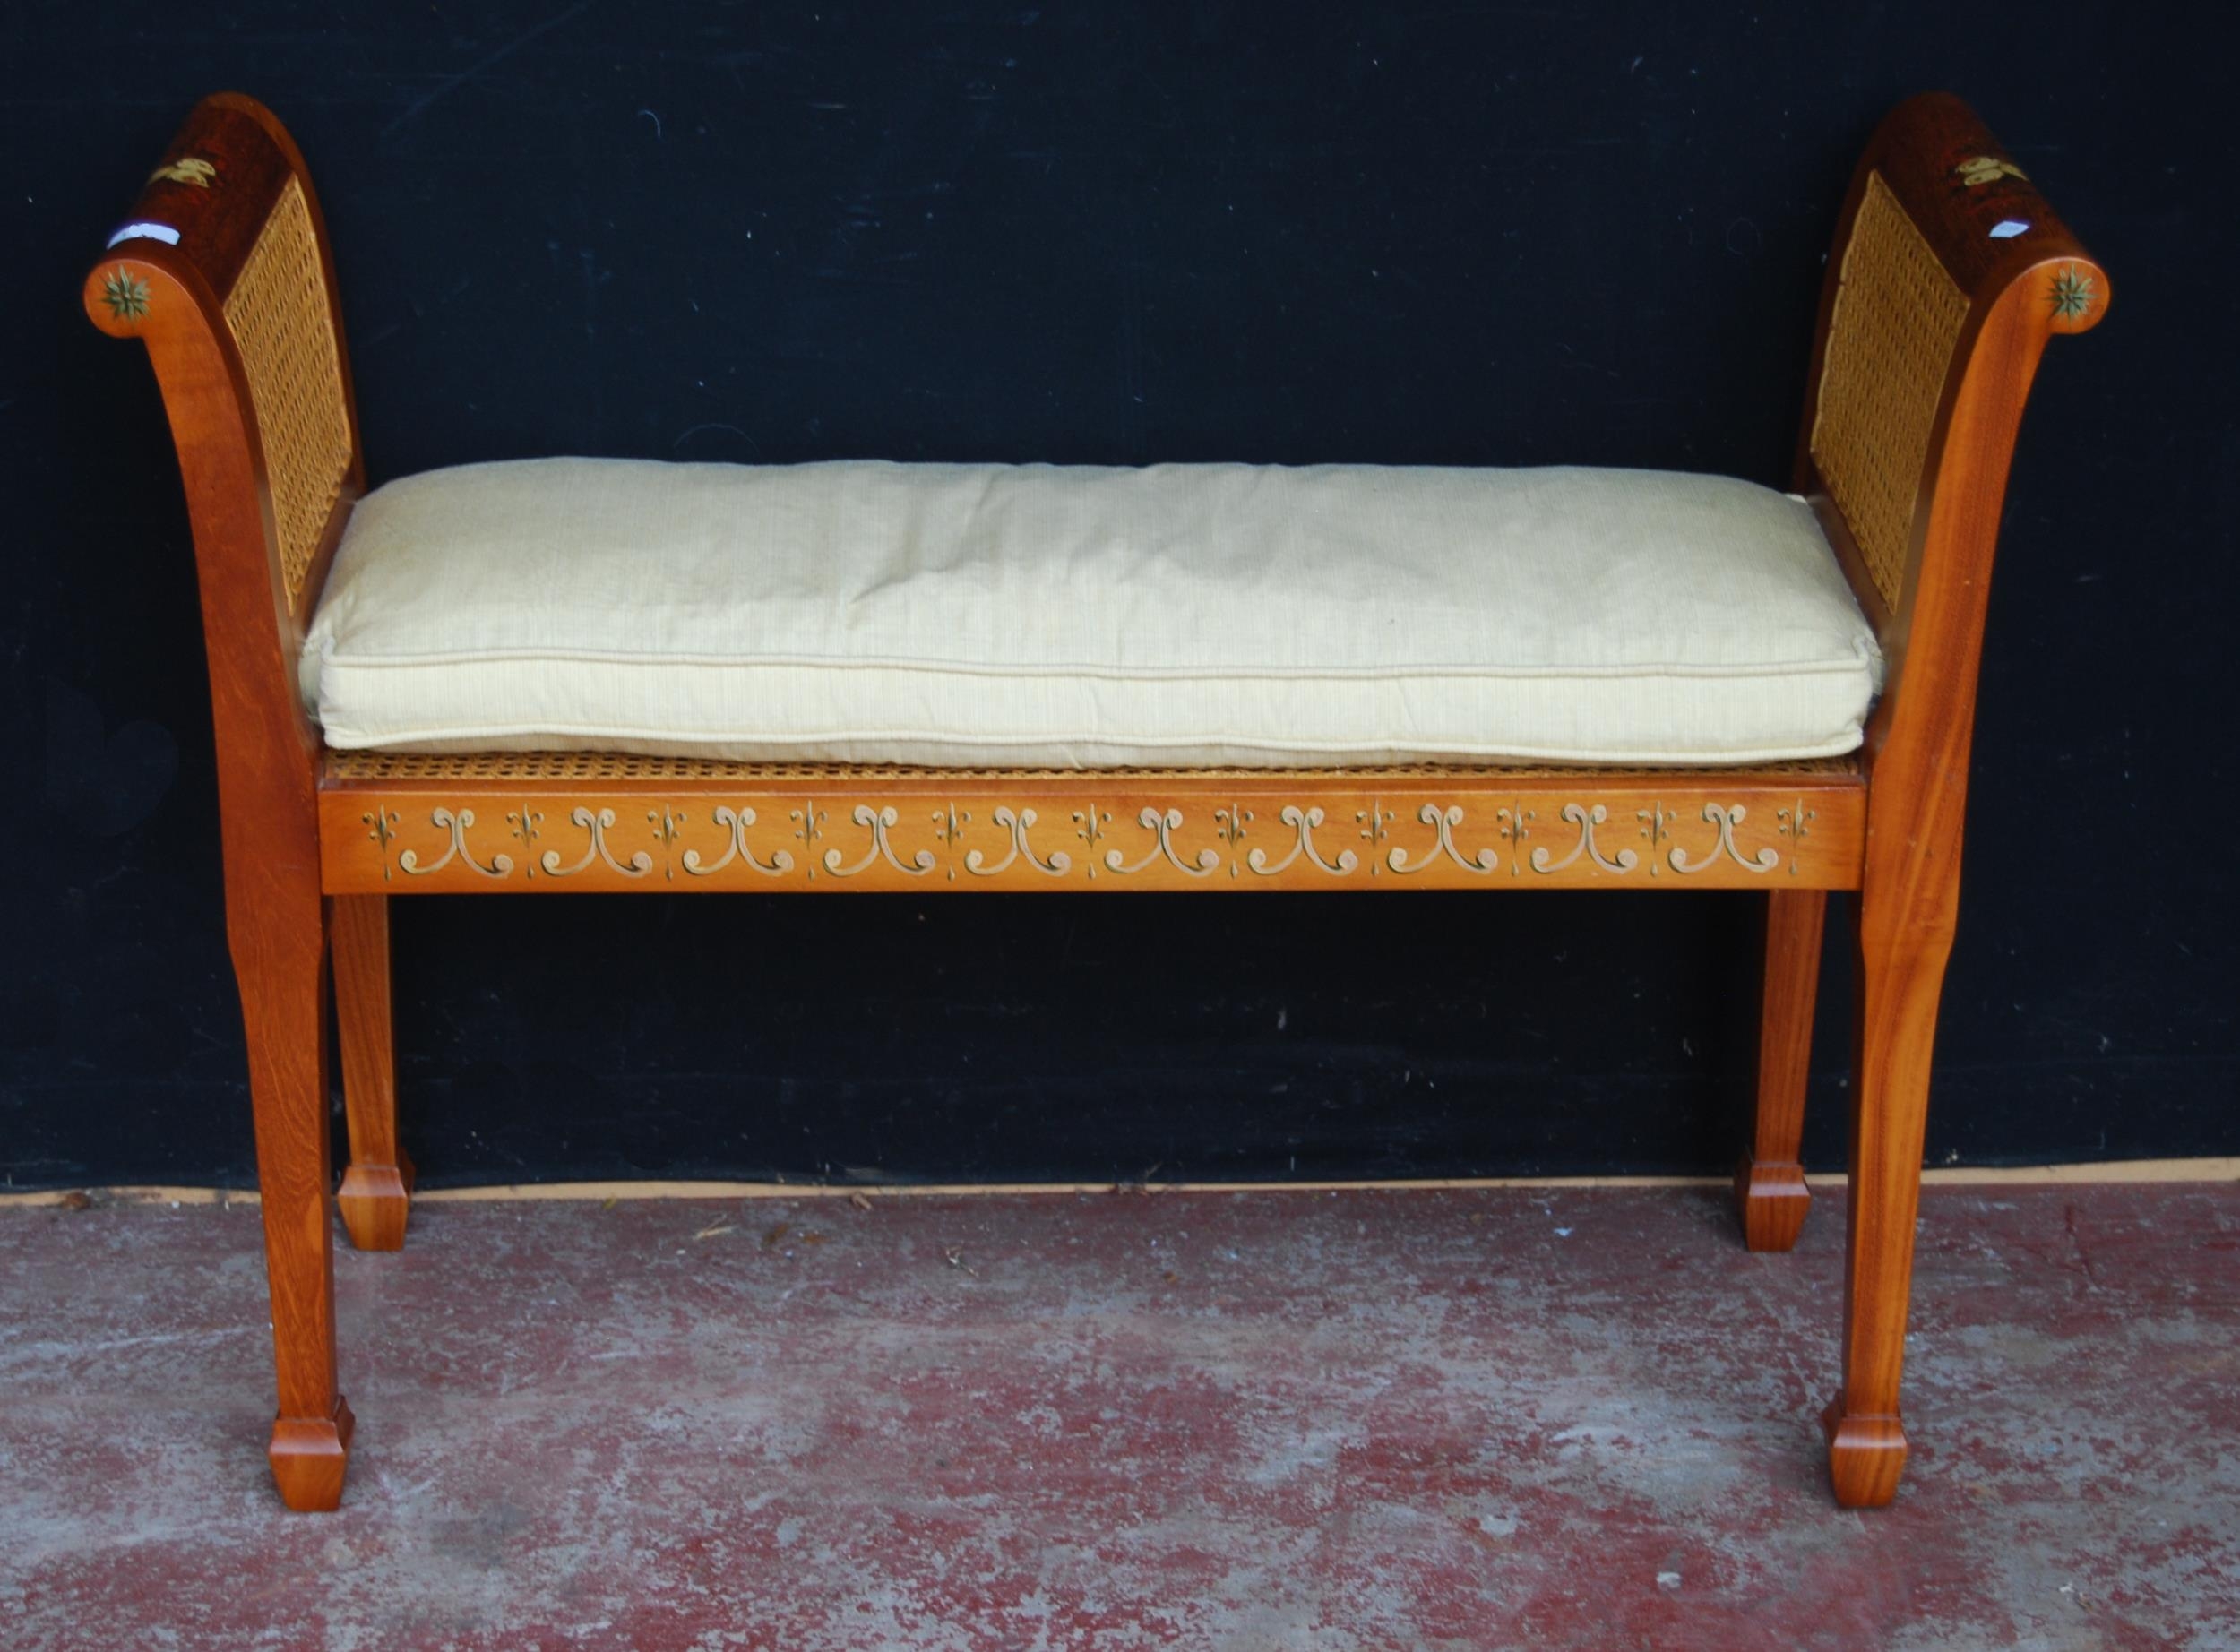 Bergère window seat in the Sheraton style with double cane sides and cushion to the seat, on tapered